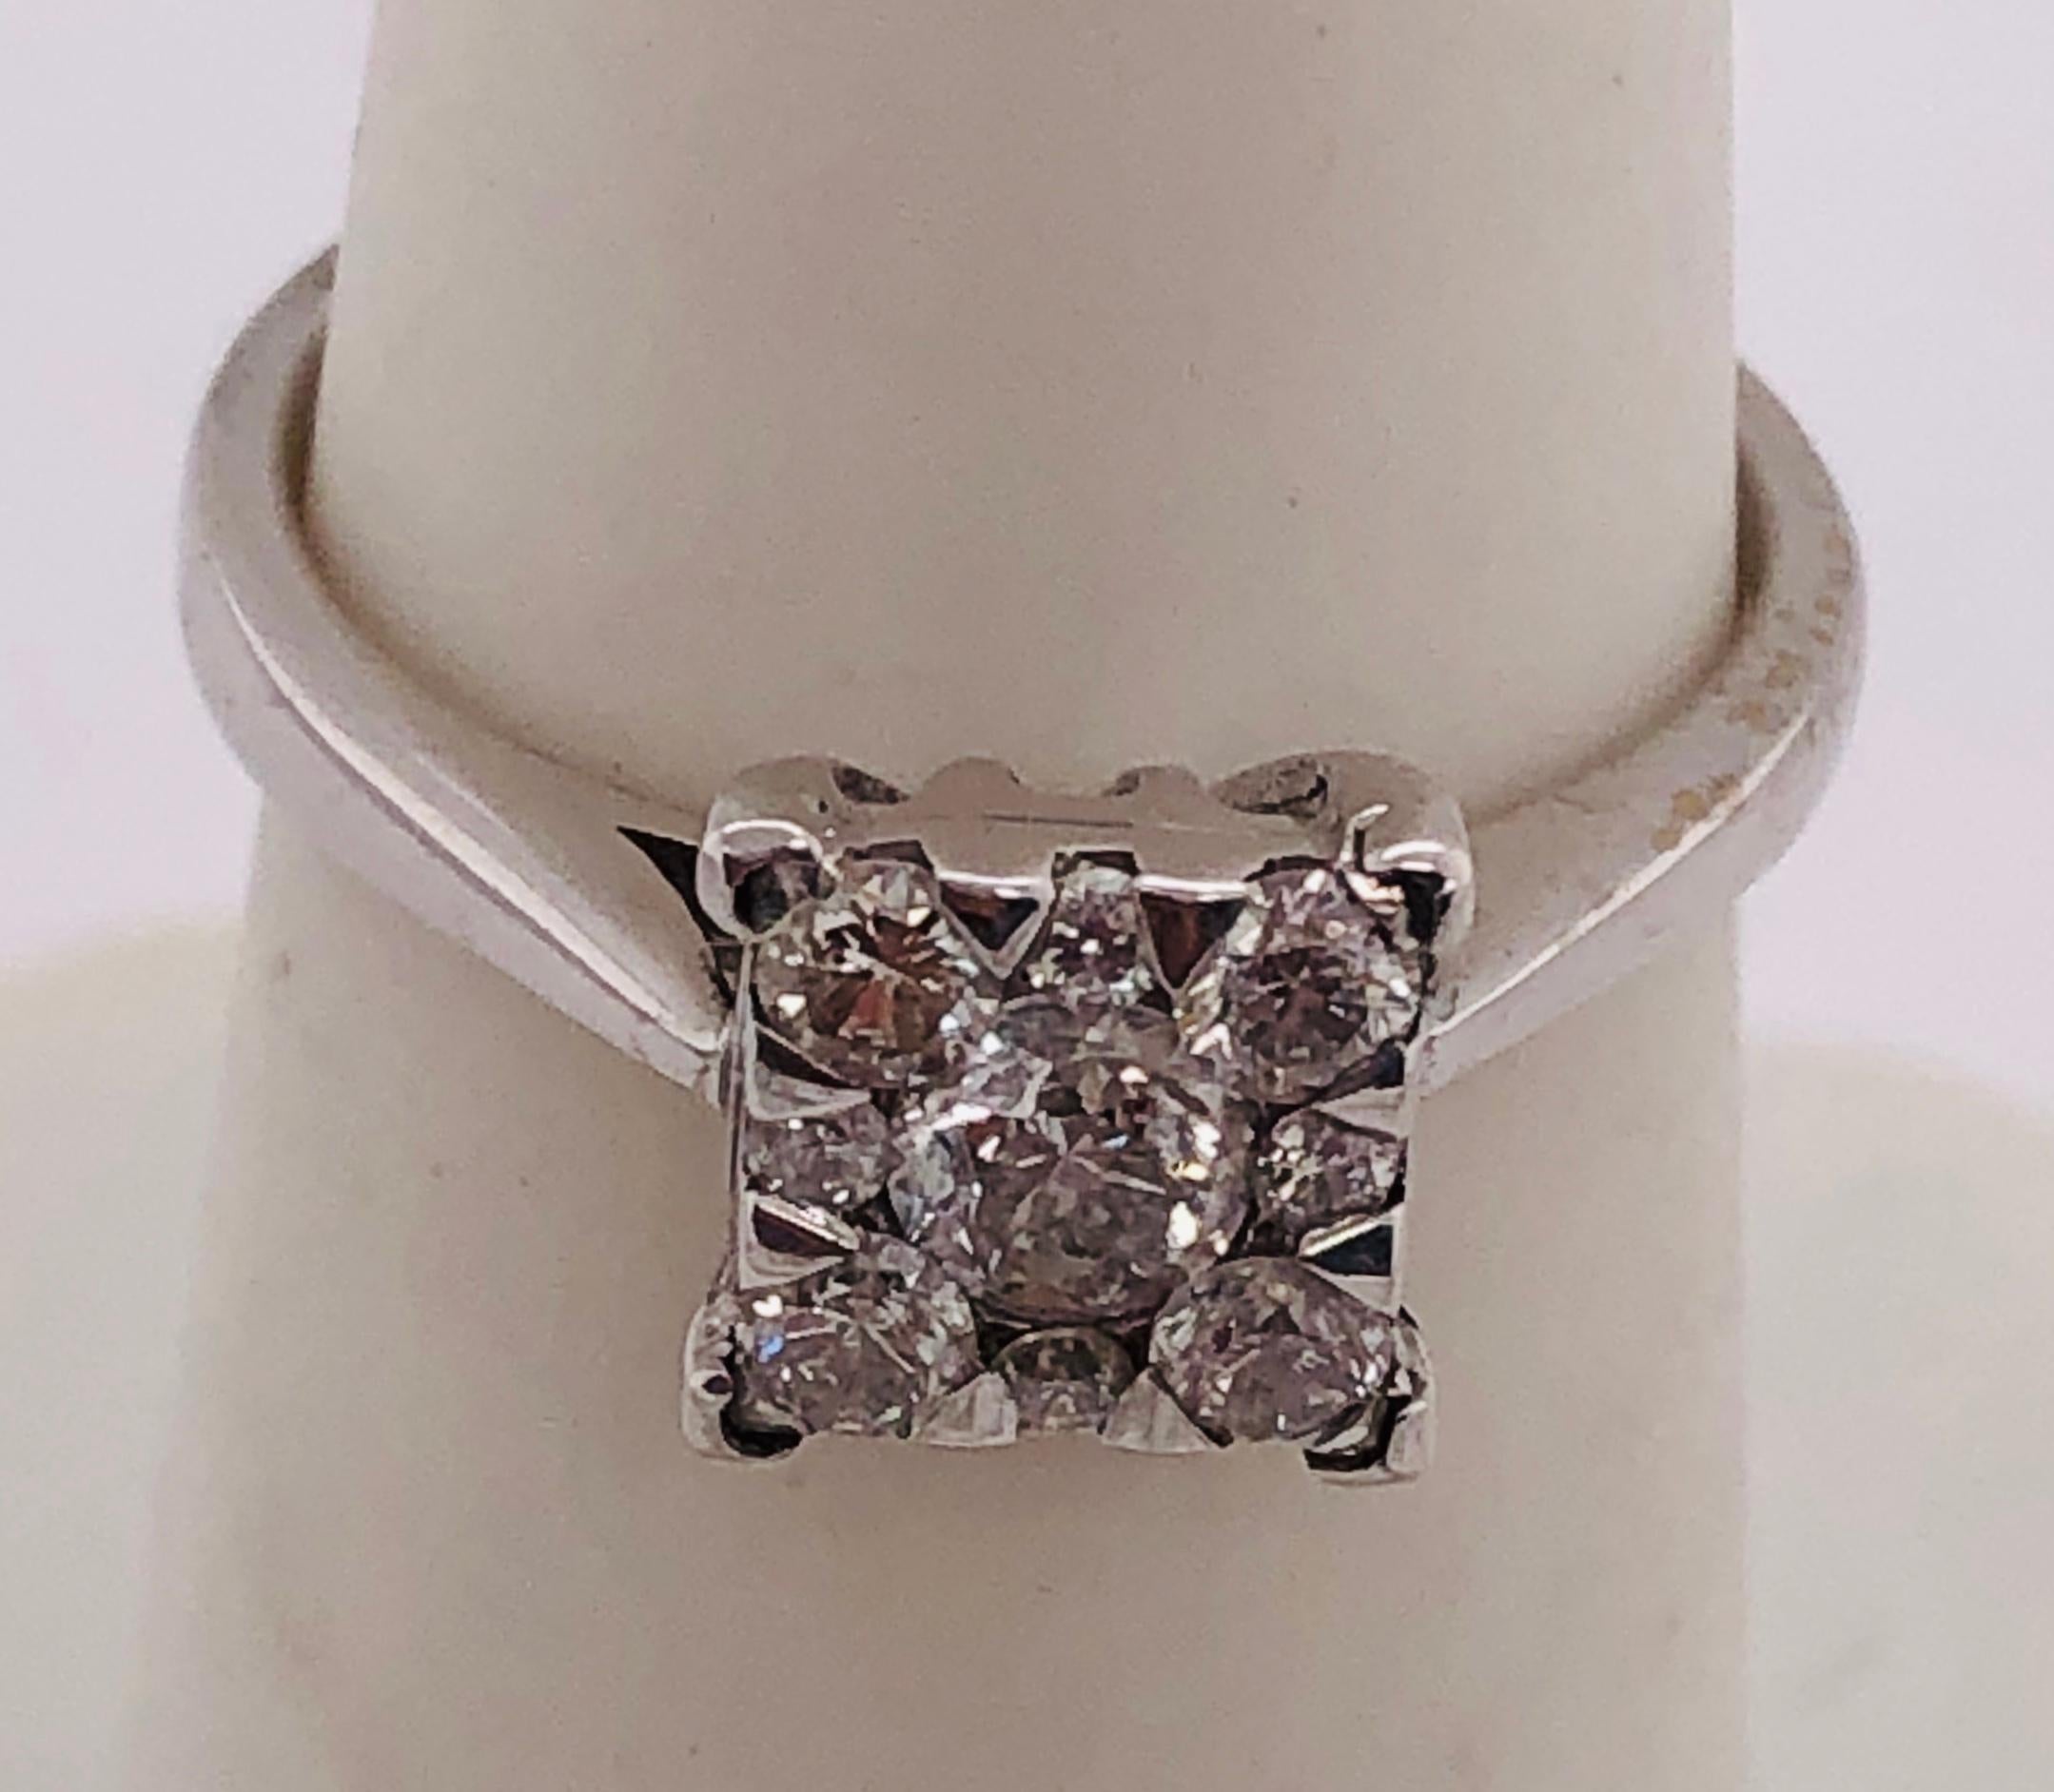 14 Karat White Gold Engagement Bridal Ring with Diamonds 0.67 TDW In Good Condition For Sale In Stamford, CT